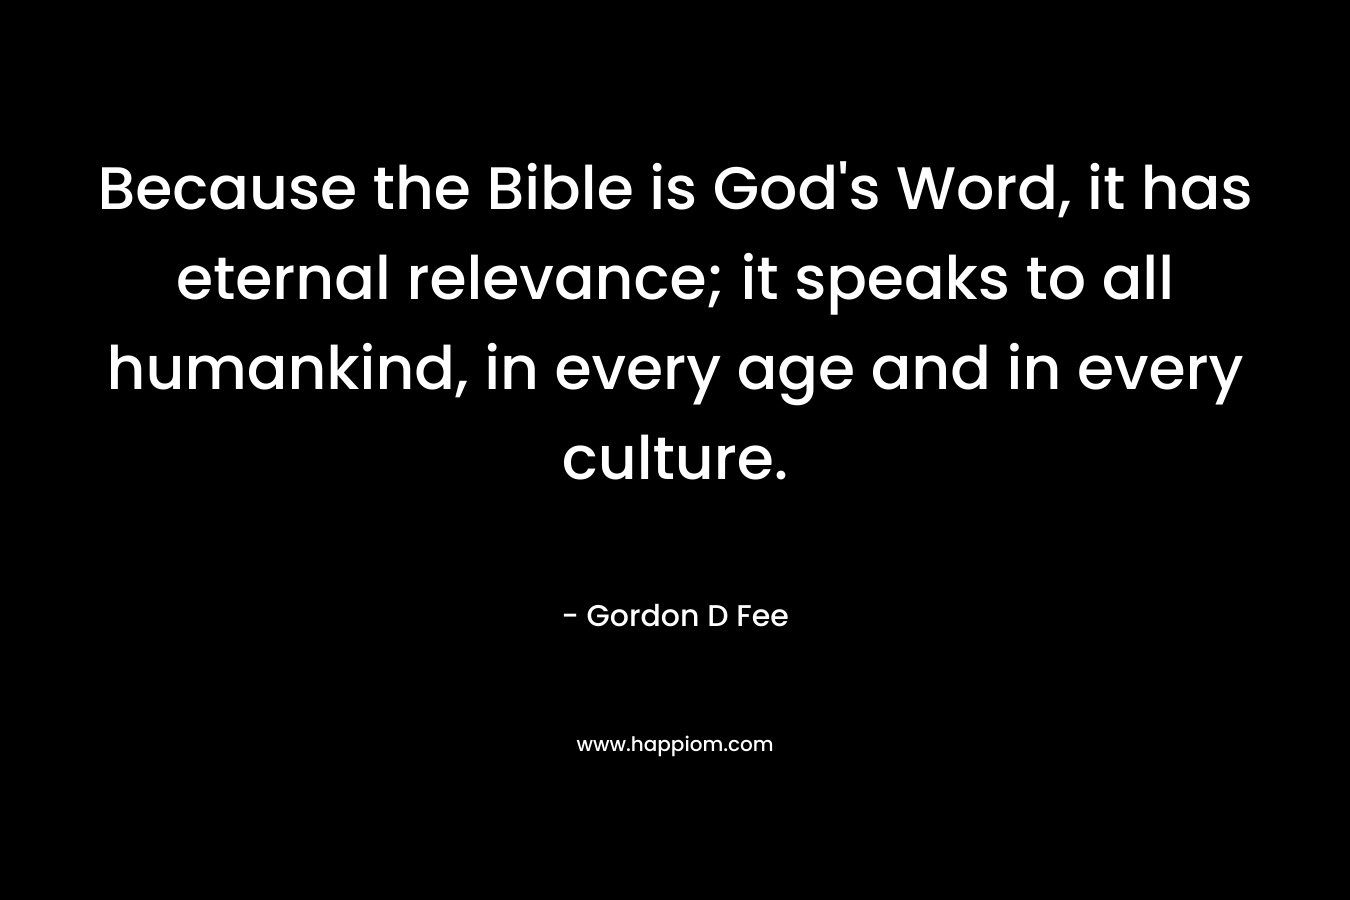 Because the Bible is God's Word, it has eternal relevance; it speaks to all humankind, in every age and in every culture.